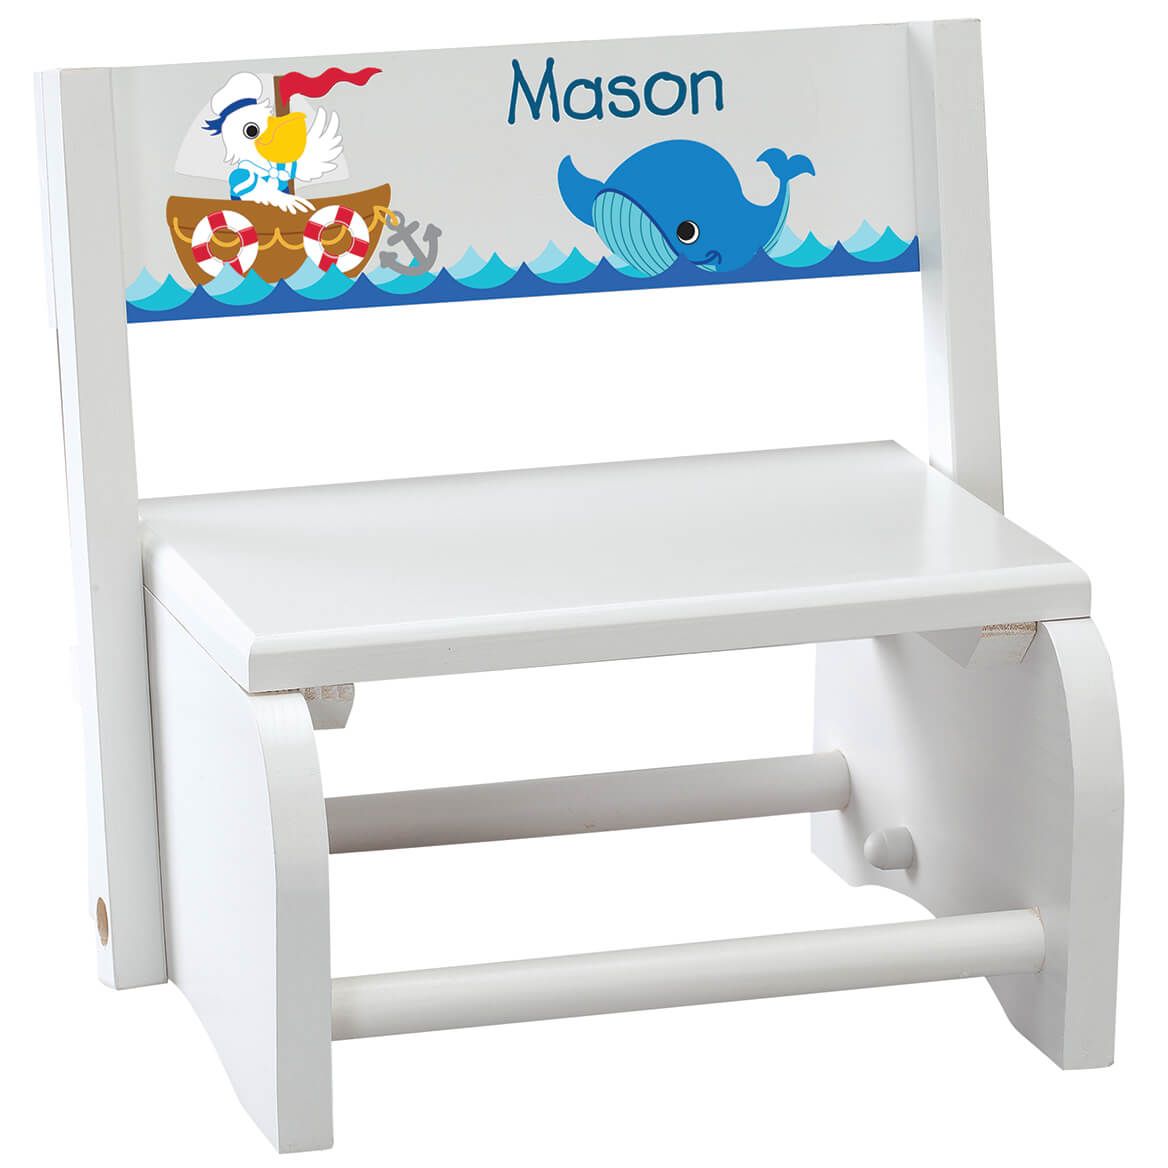 Personalized Children's White Ocean Friends Step Stool + '-' + 368492